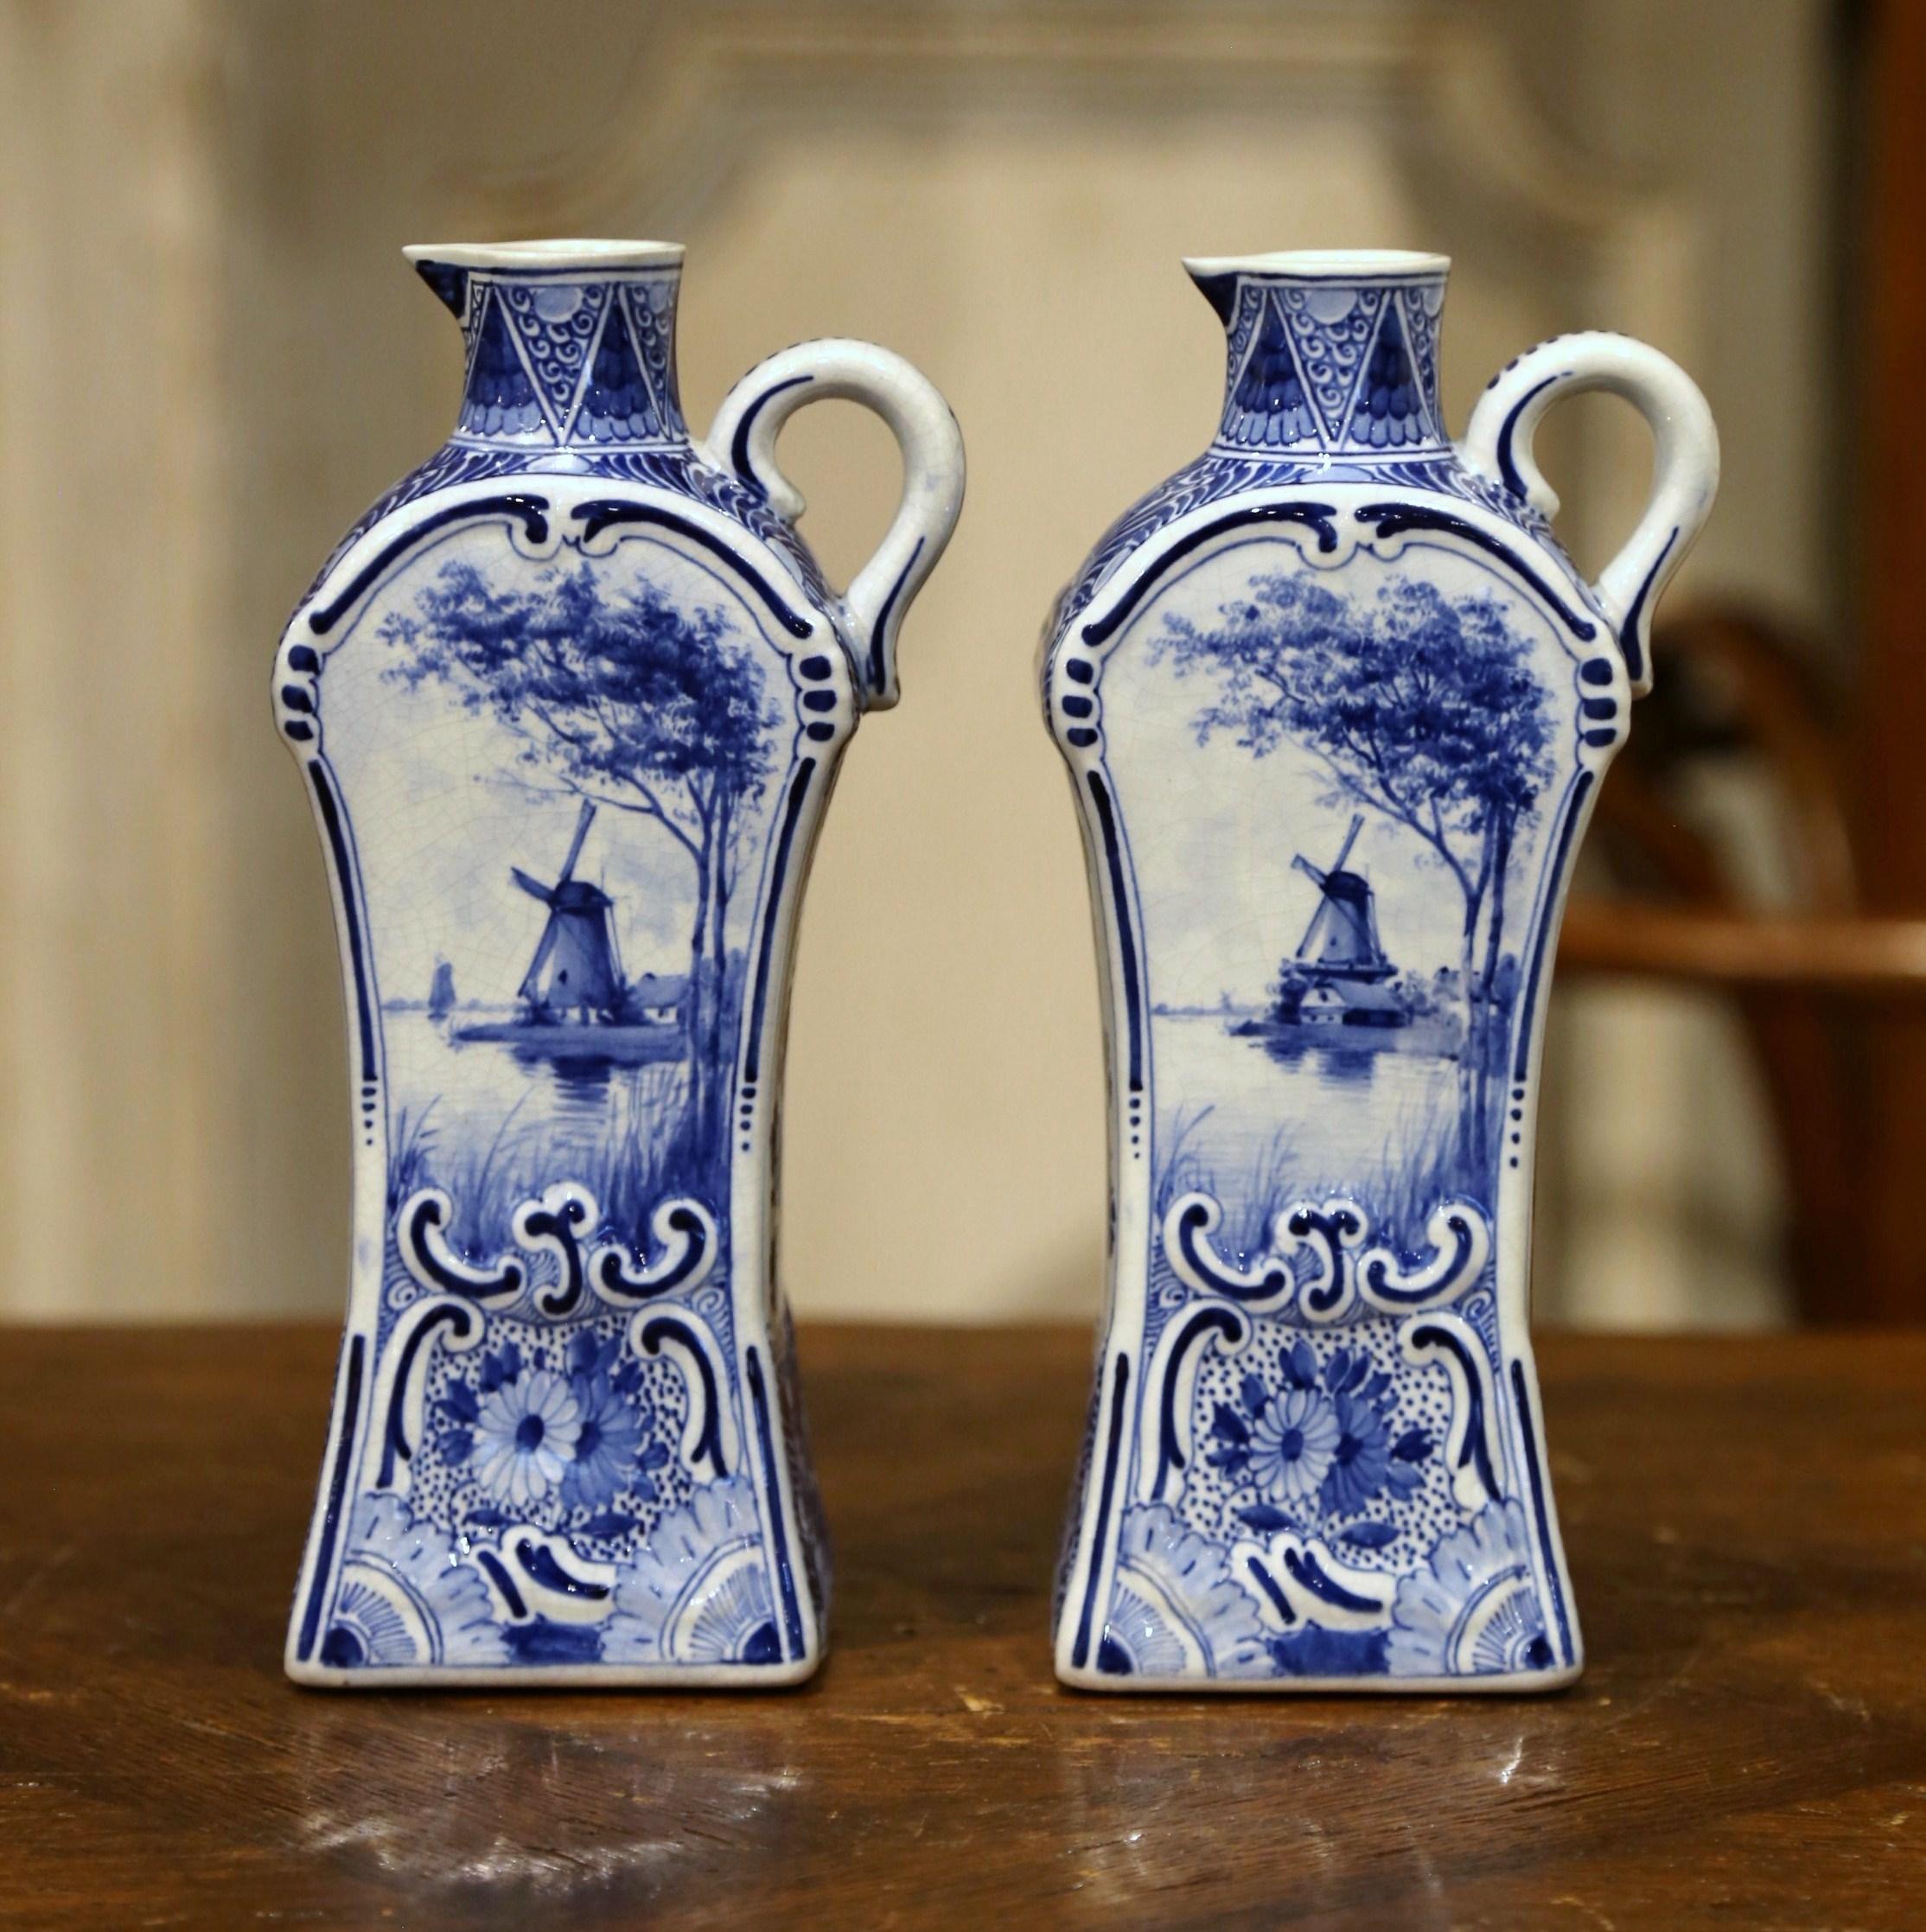 Pair of Early 20th Century Dutch Painted Faience Delft Oil or Vinegar Bottles For Sale 2